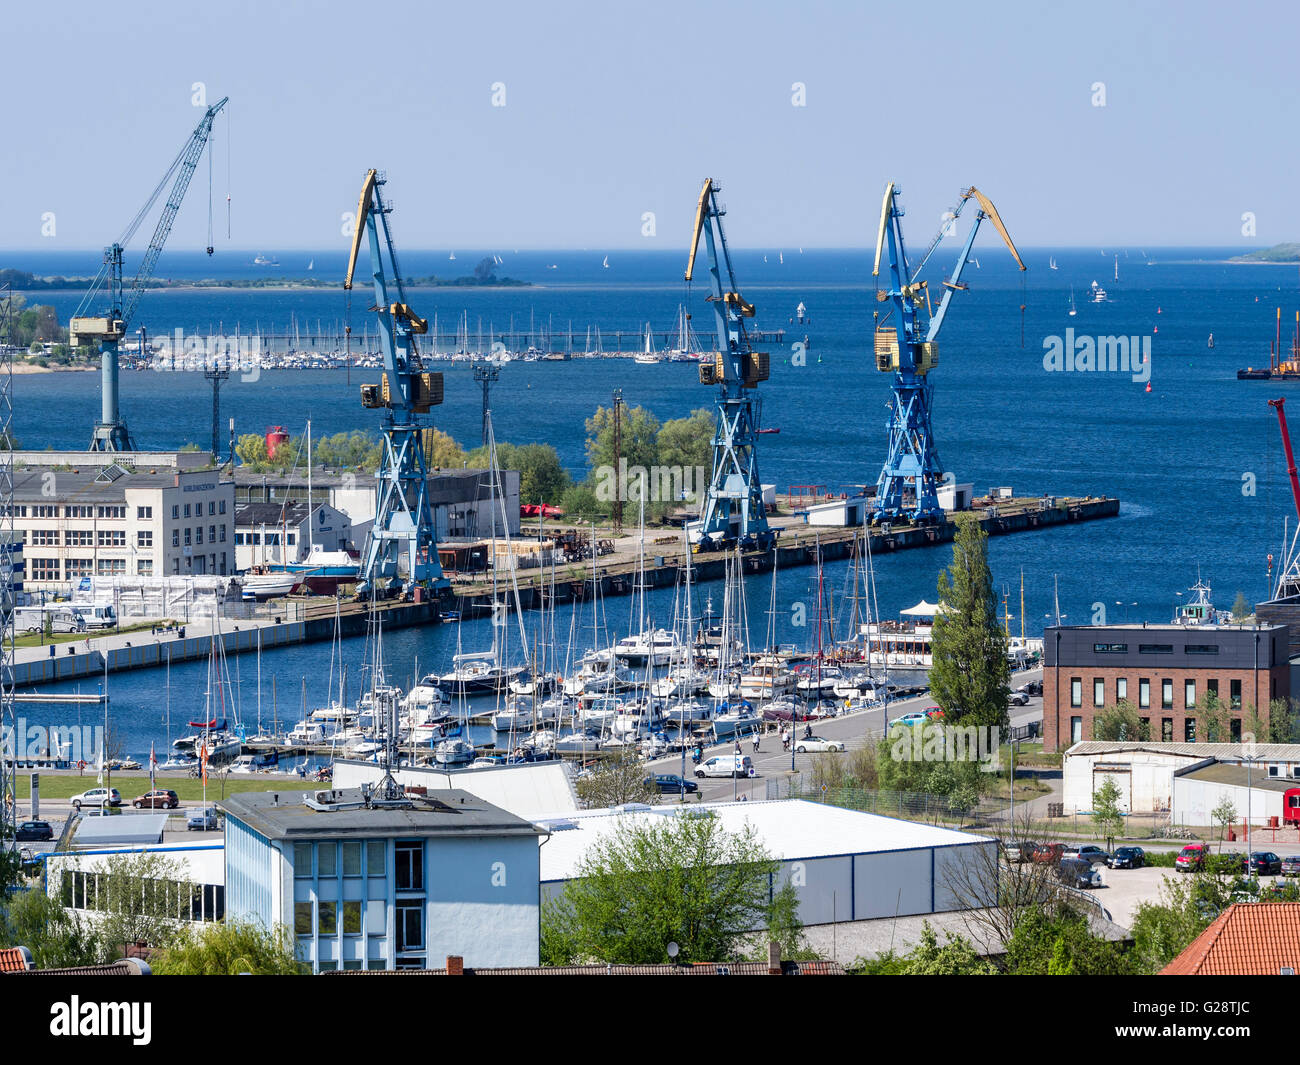 Cranes at the harbor, seen from platform of St. Georgen church, Wismar, Germany. Stock Photo